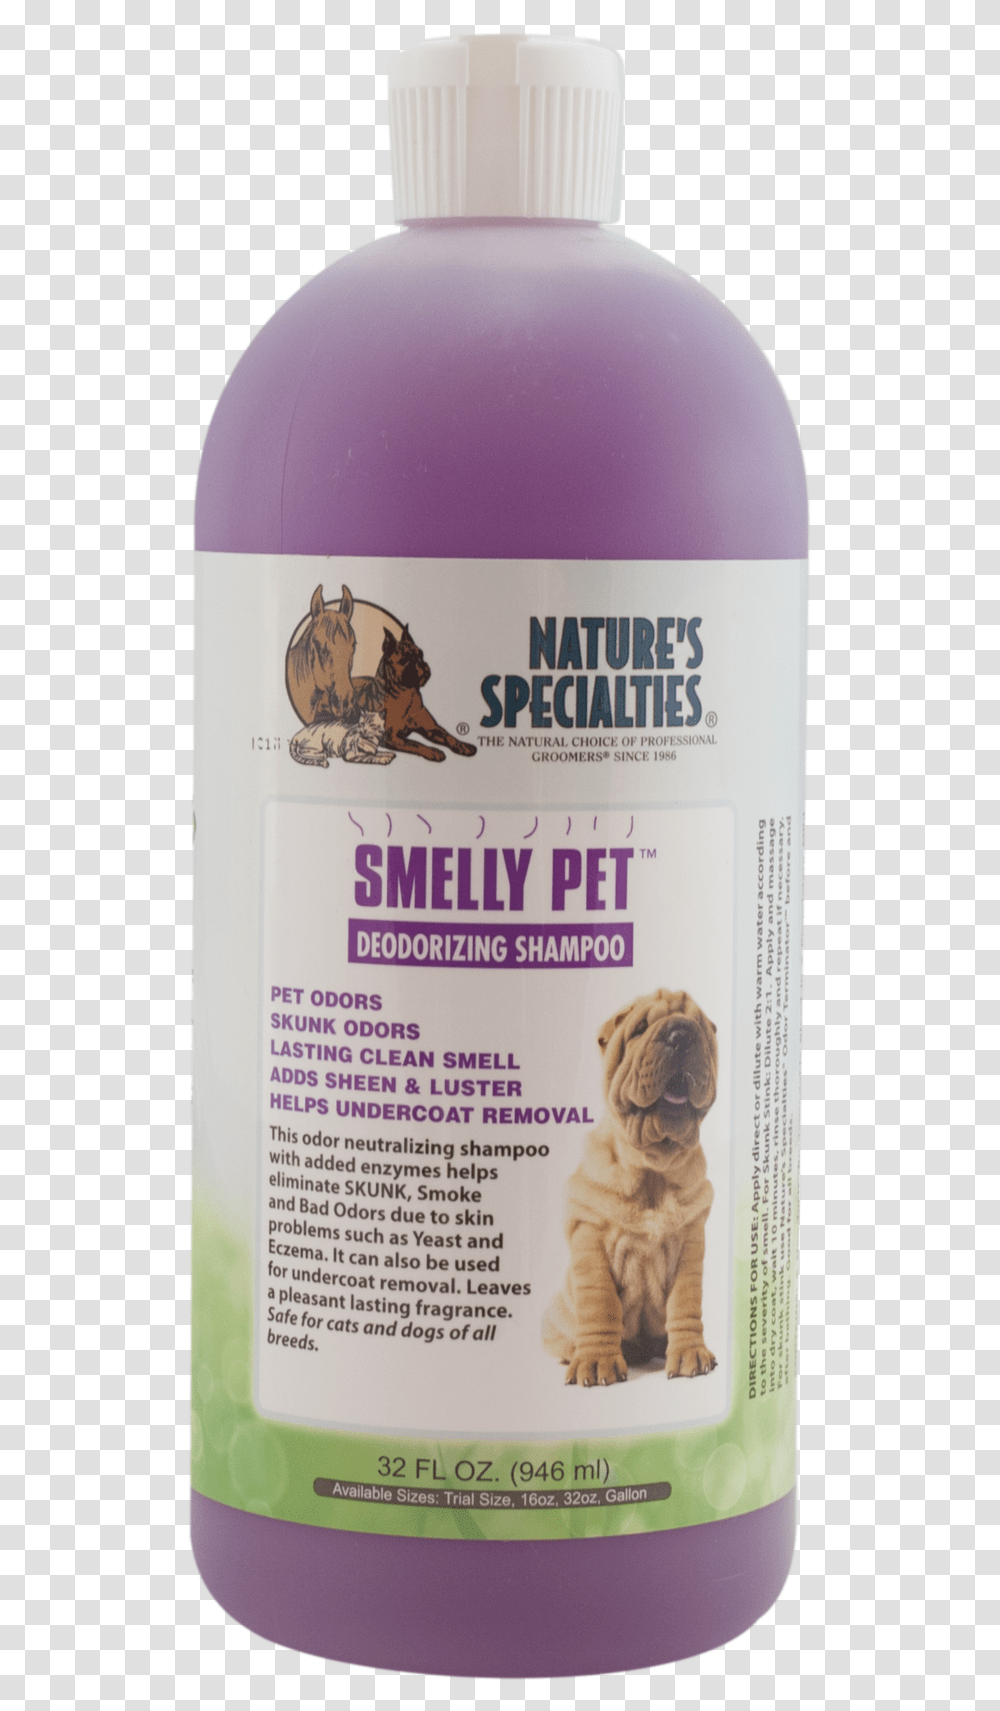 Smelly Pet Shampoo For Dogs Amp CatsData Zoom Cdn Cosmetics, Tiger, Food, Plant, Bottle Transparent Png